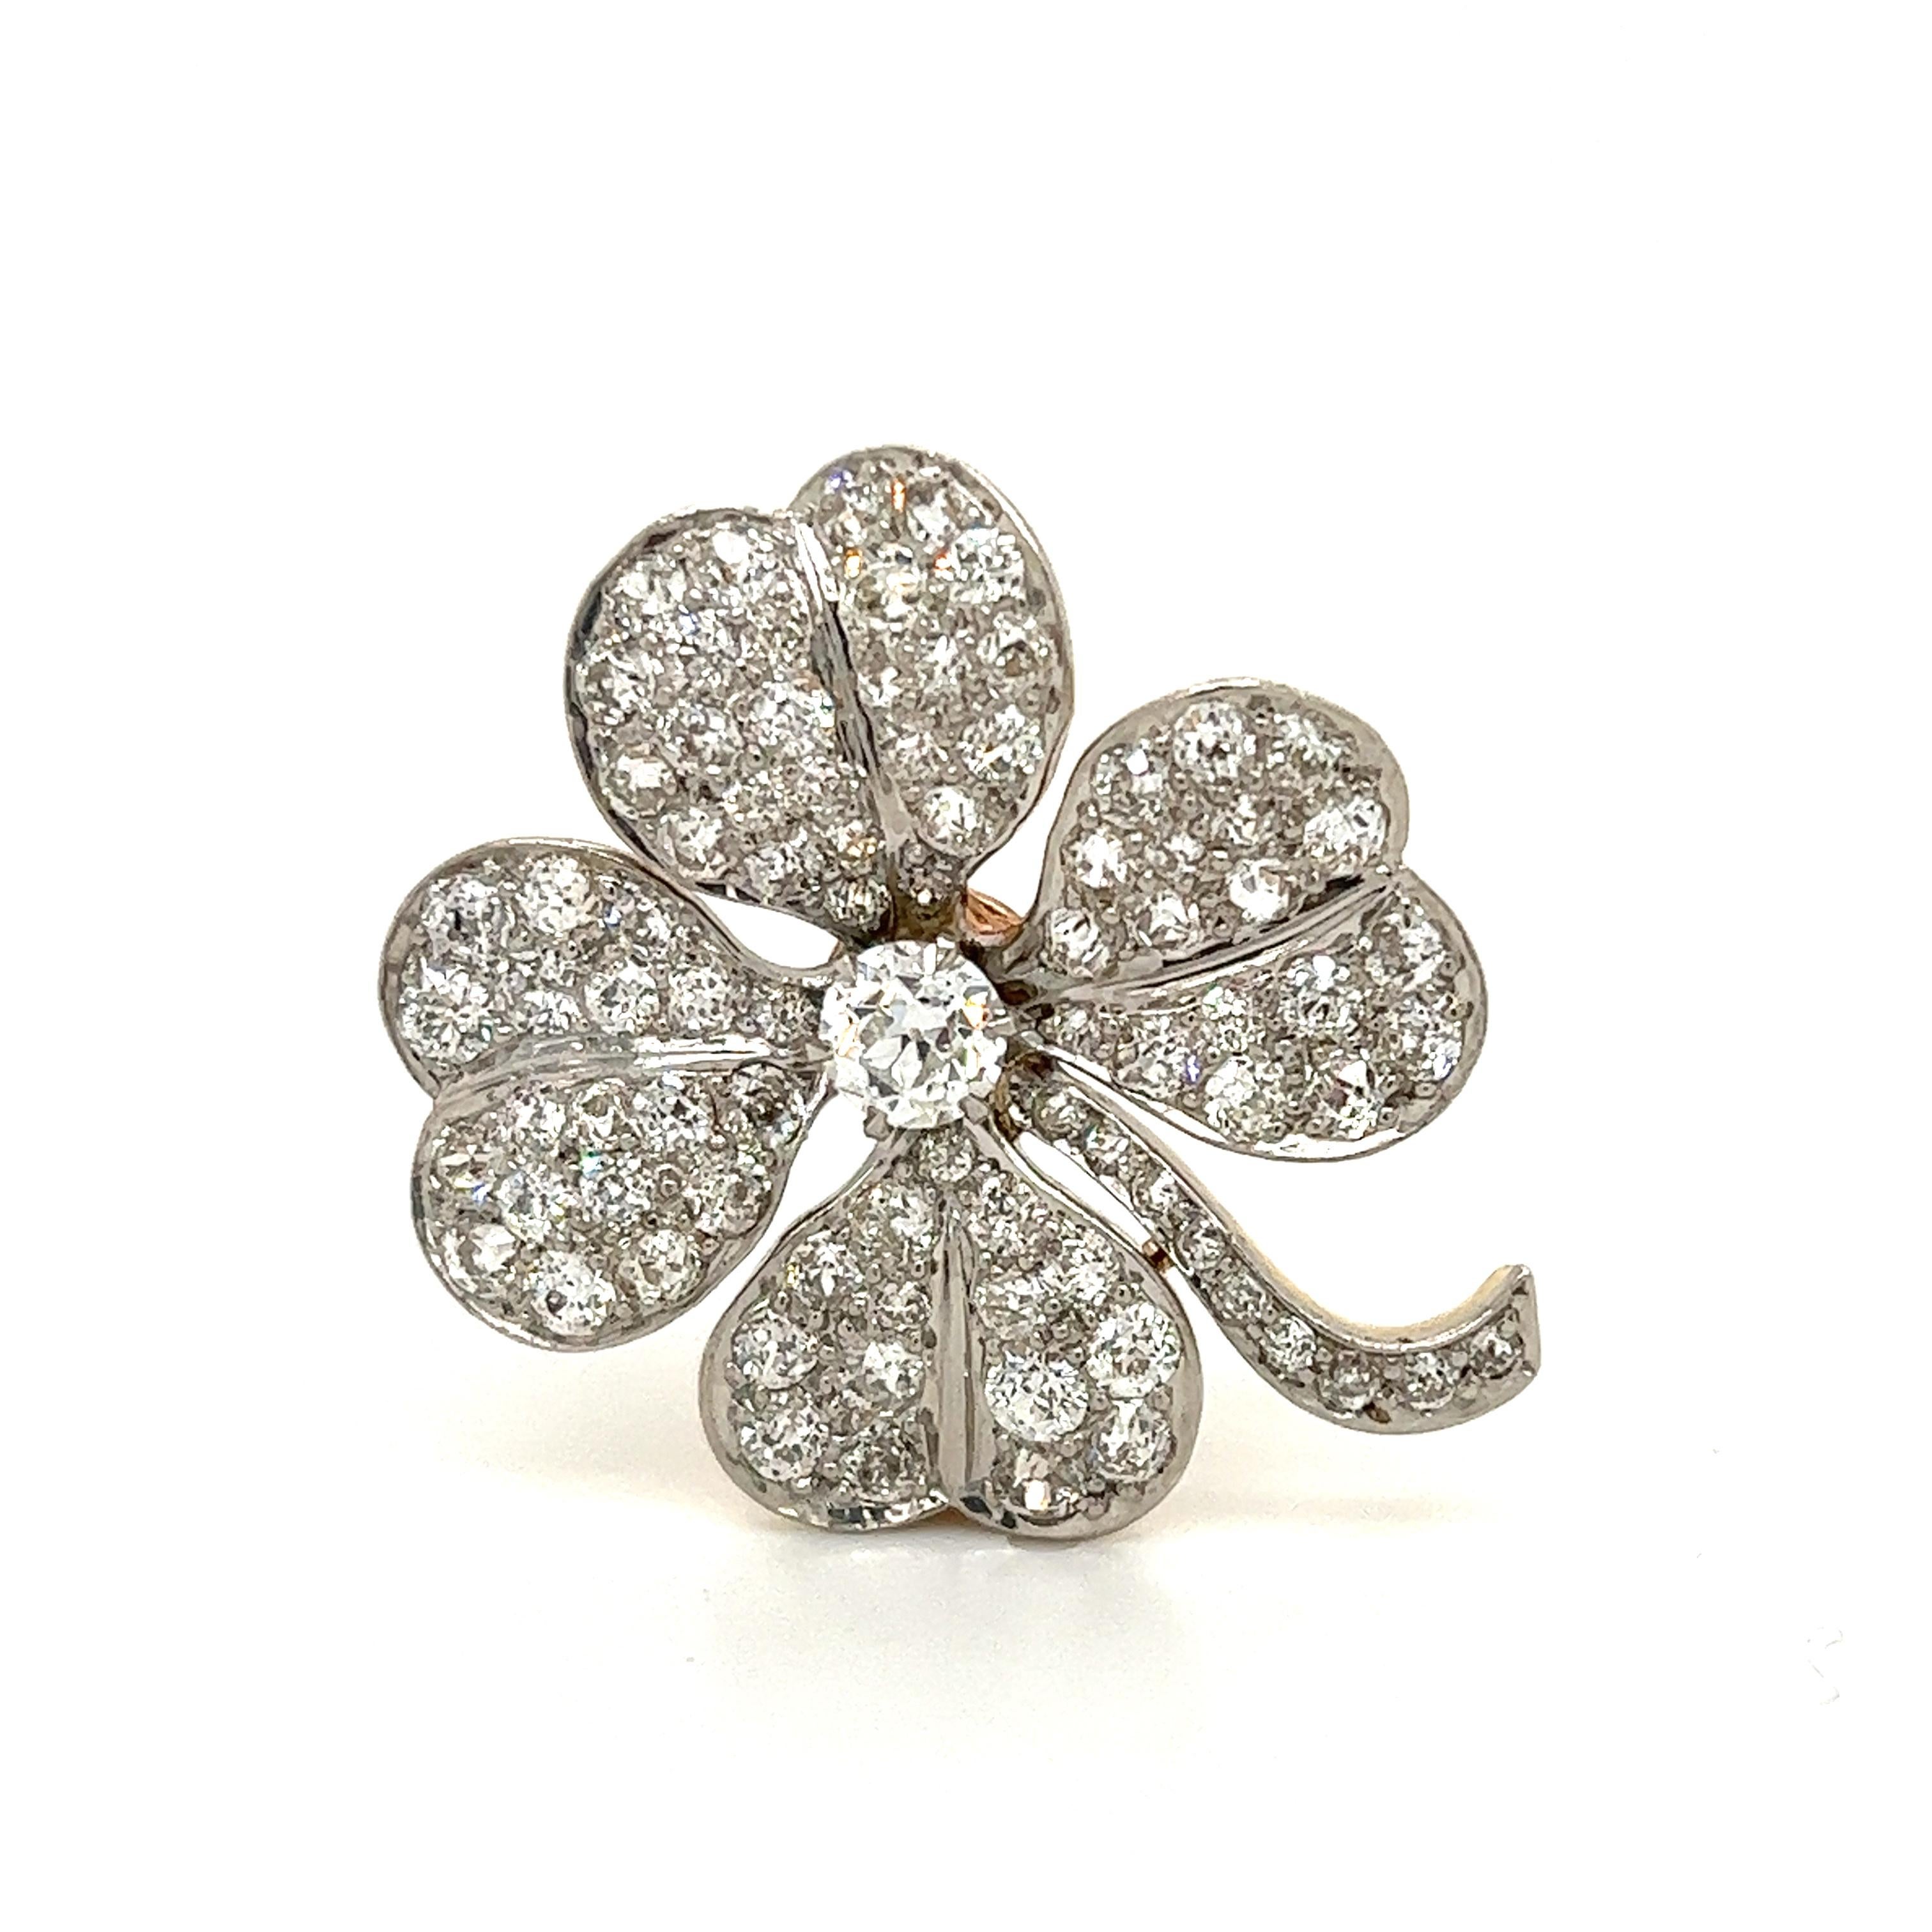 True beauty seen in this vintage Tiffany & Co. four leaf clover lucky charm. The piece is crafted in platinum and 18k yellow gold. The clover is fully encrusted with natural earth mined old mine cut diamonds. There are approximately 8.75 carats of